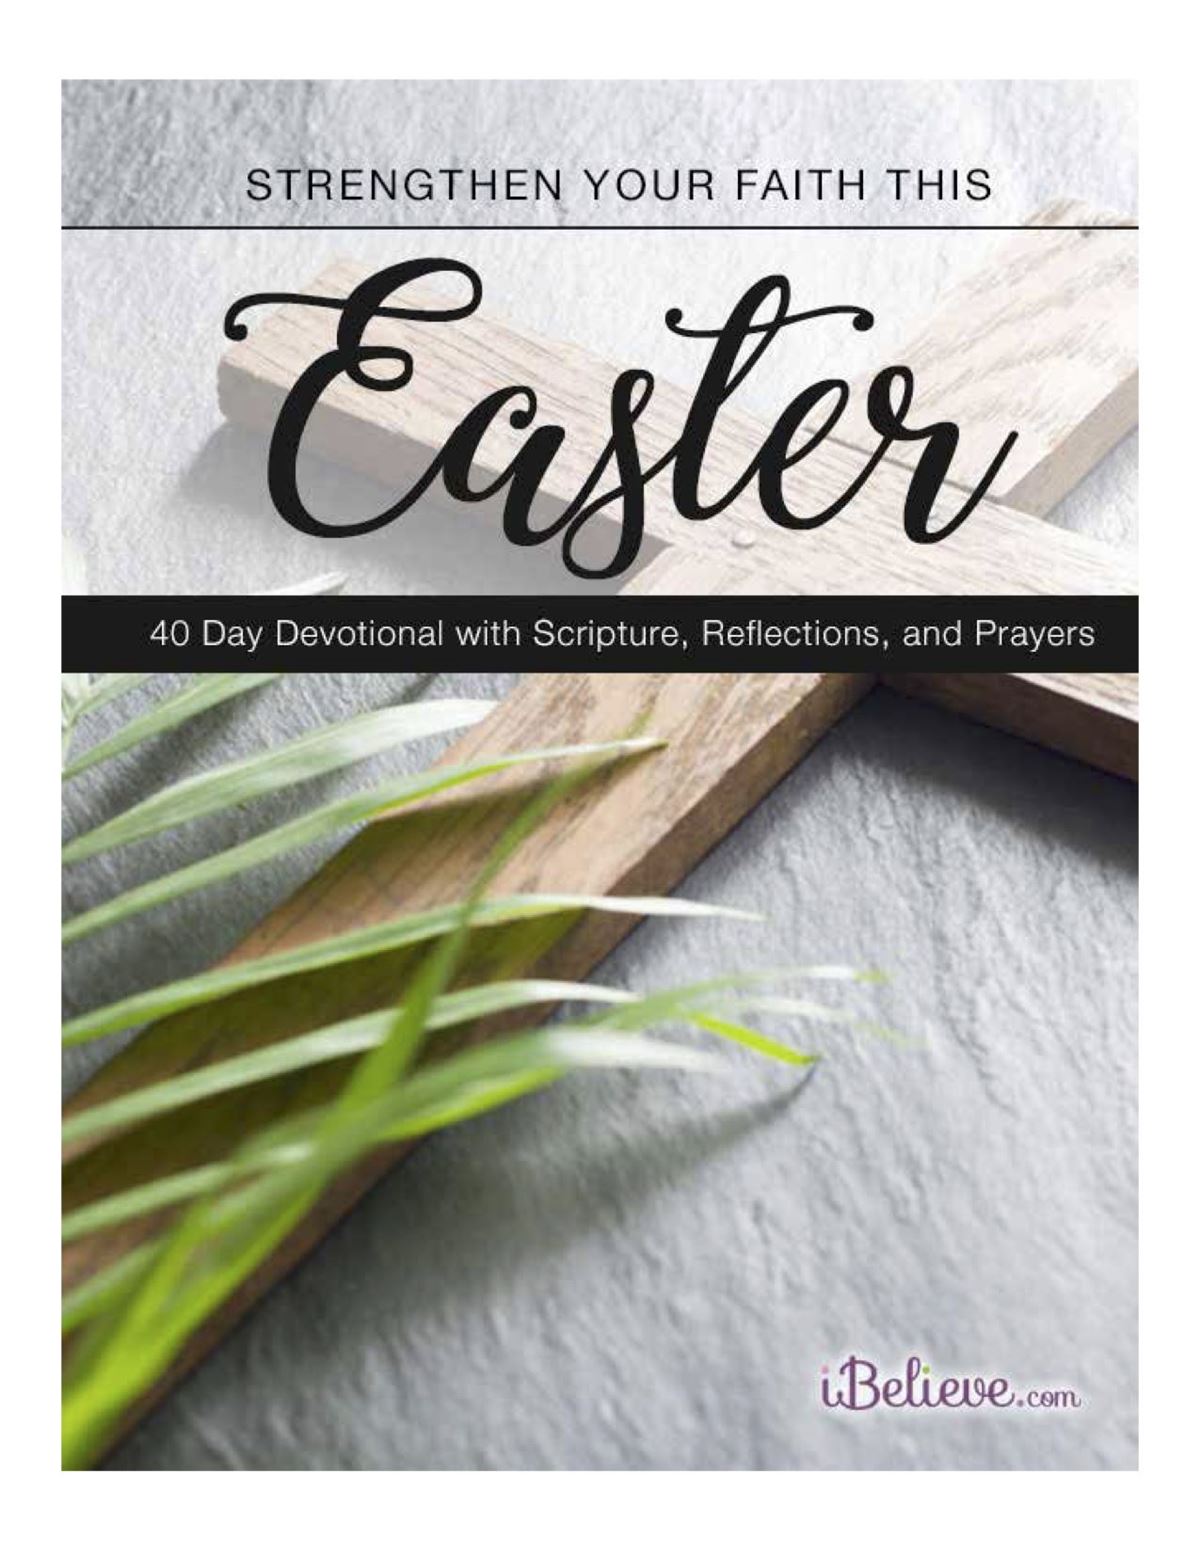 Strengthen Your Faith this Easter - 40 Day Devotional